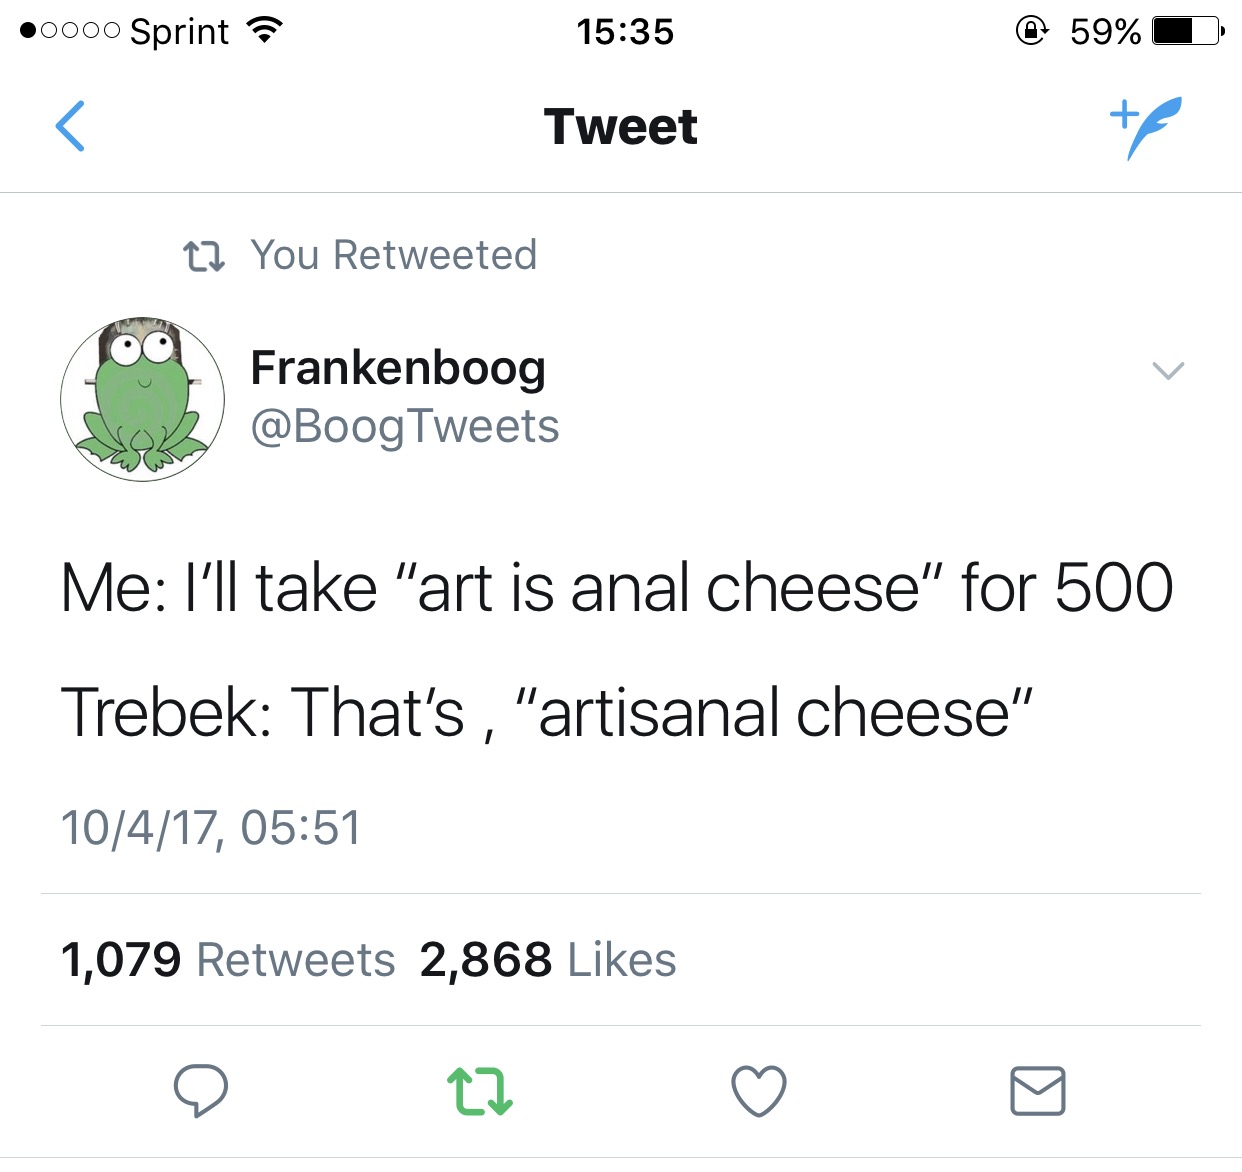 angle - 0000 Sprint a @ 59% D Tweet 22 You Retweeted 109 Fran Frankenboog Tweets Me I'll take "art is anal cheese" for 500 Trebek That's , "artisanal cheese" 10417, 1,079 2,868